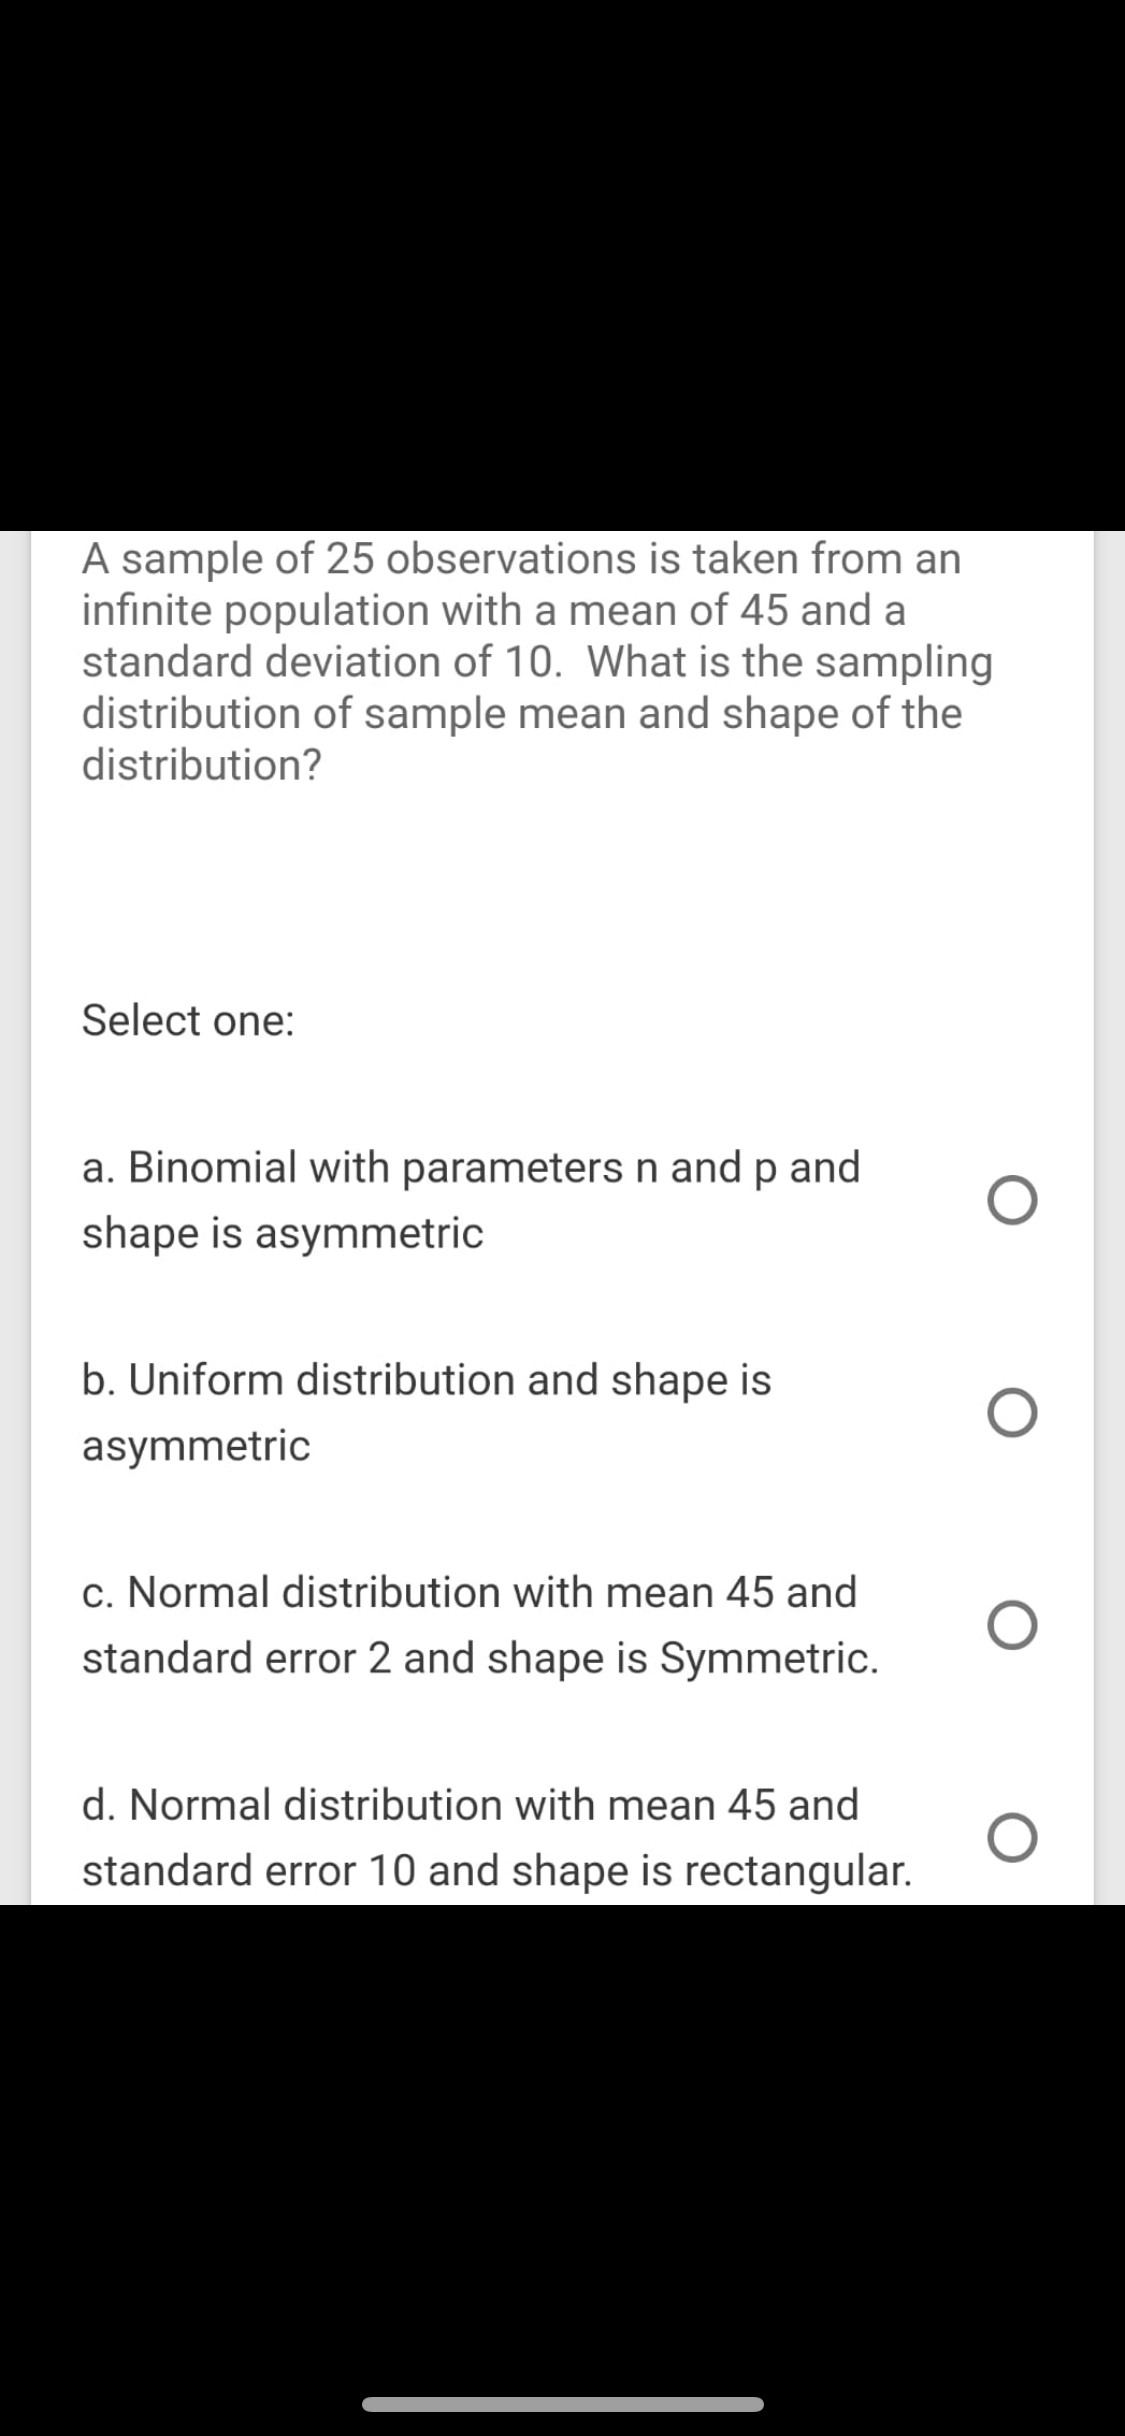 A sample of 25 observations is taken from an
infinite population with a mean of 45 and a
standard deviation of 10. What is the sampling
distribution of sample mean and shape of the
distribution?
